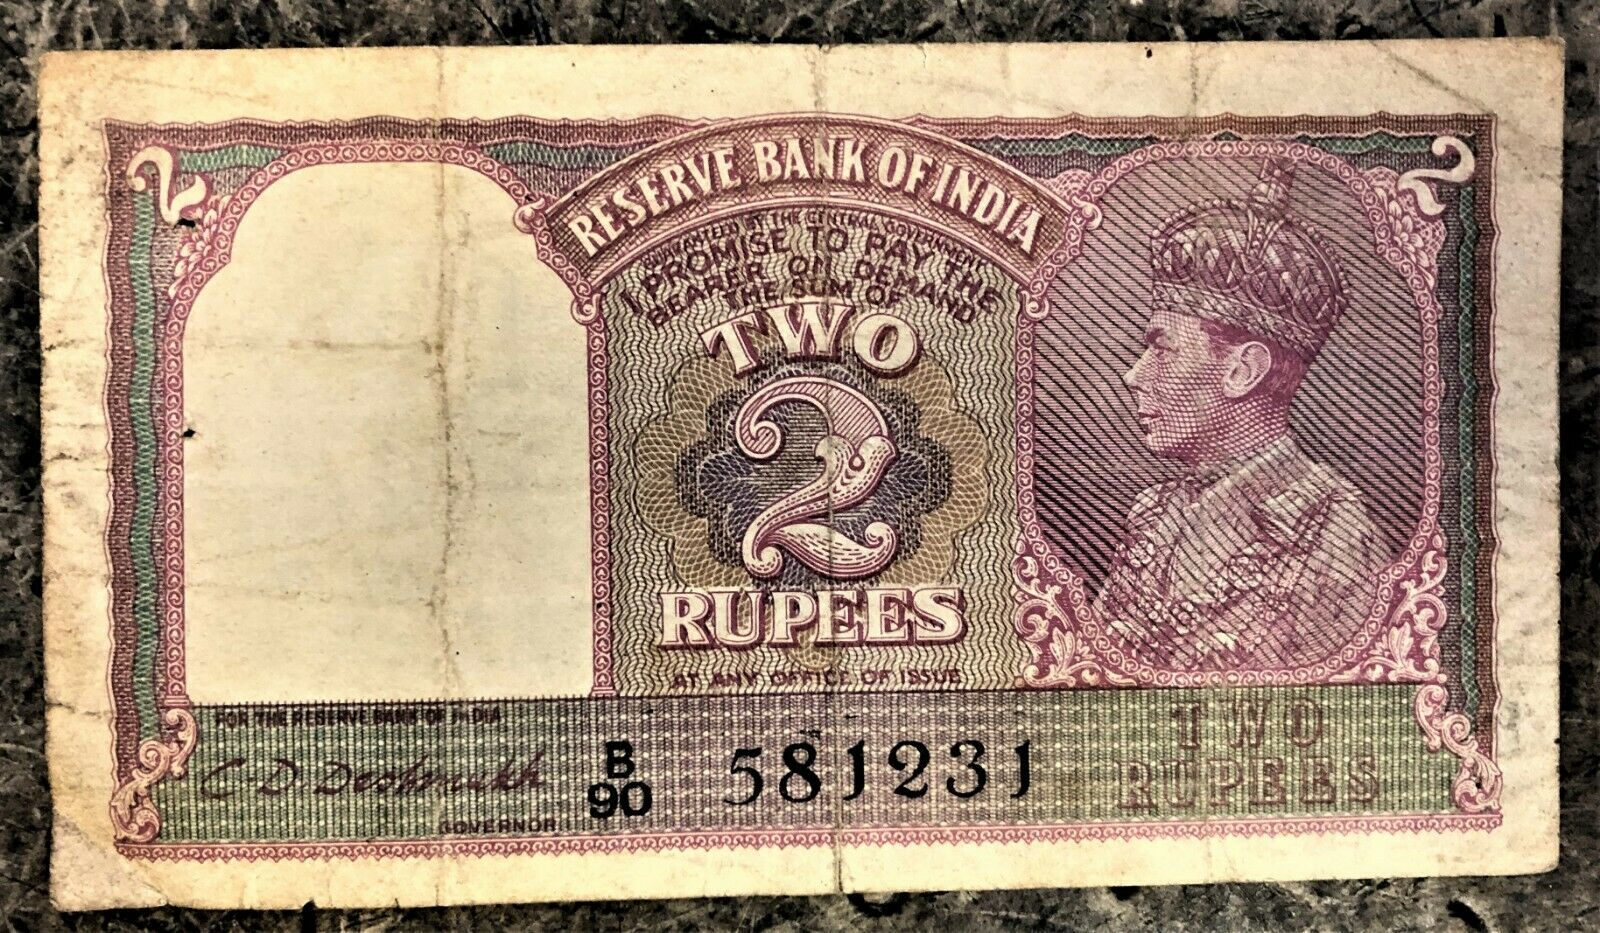 INDIA WWII 2 RUPEES NOTE SIGN DESHMUKH 1943 PICK # 17b KING GEORGE VI ISSUE CIRC